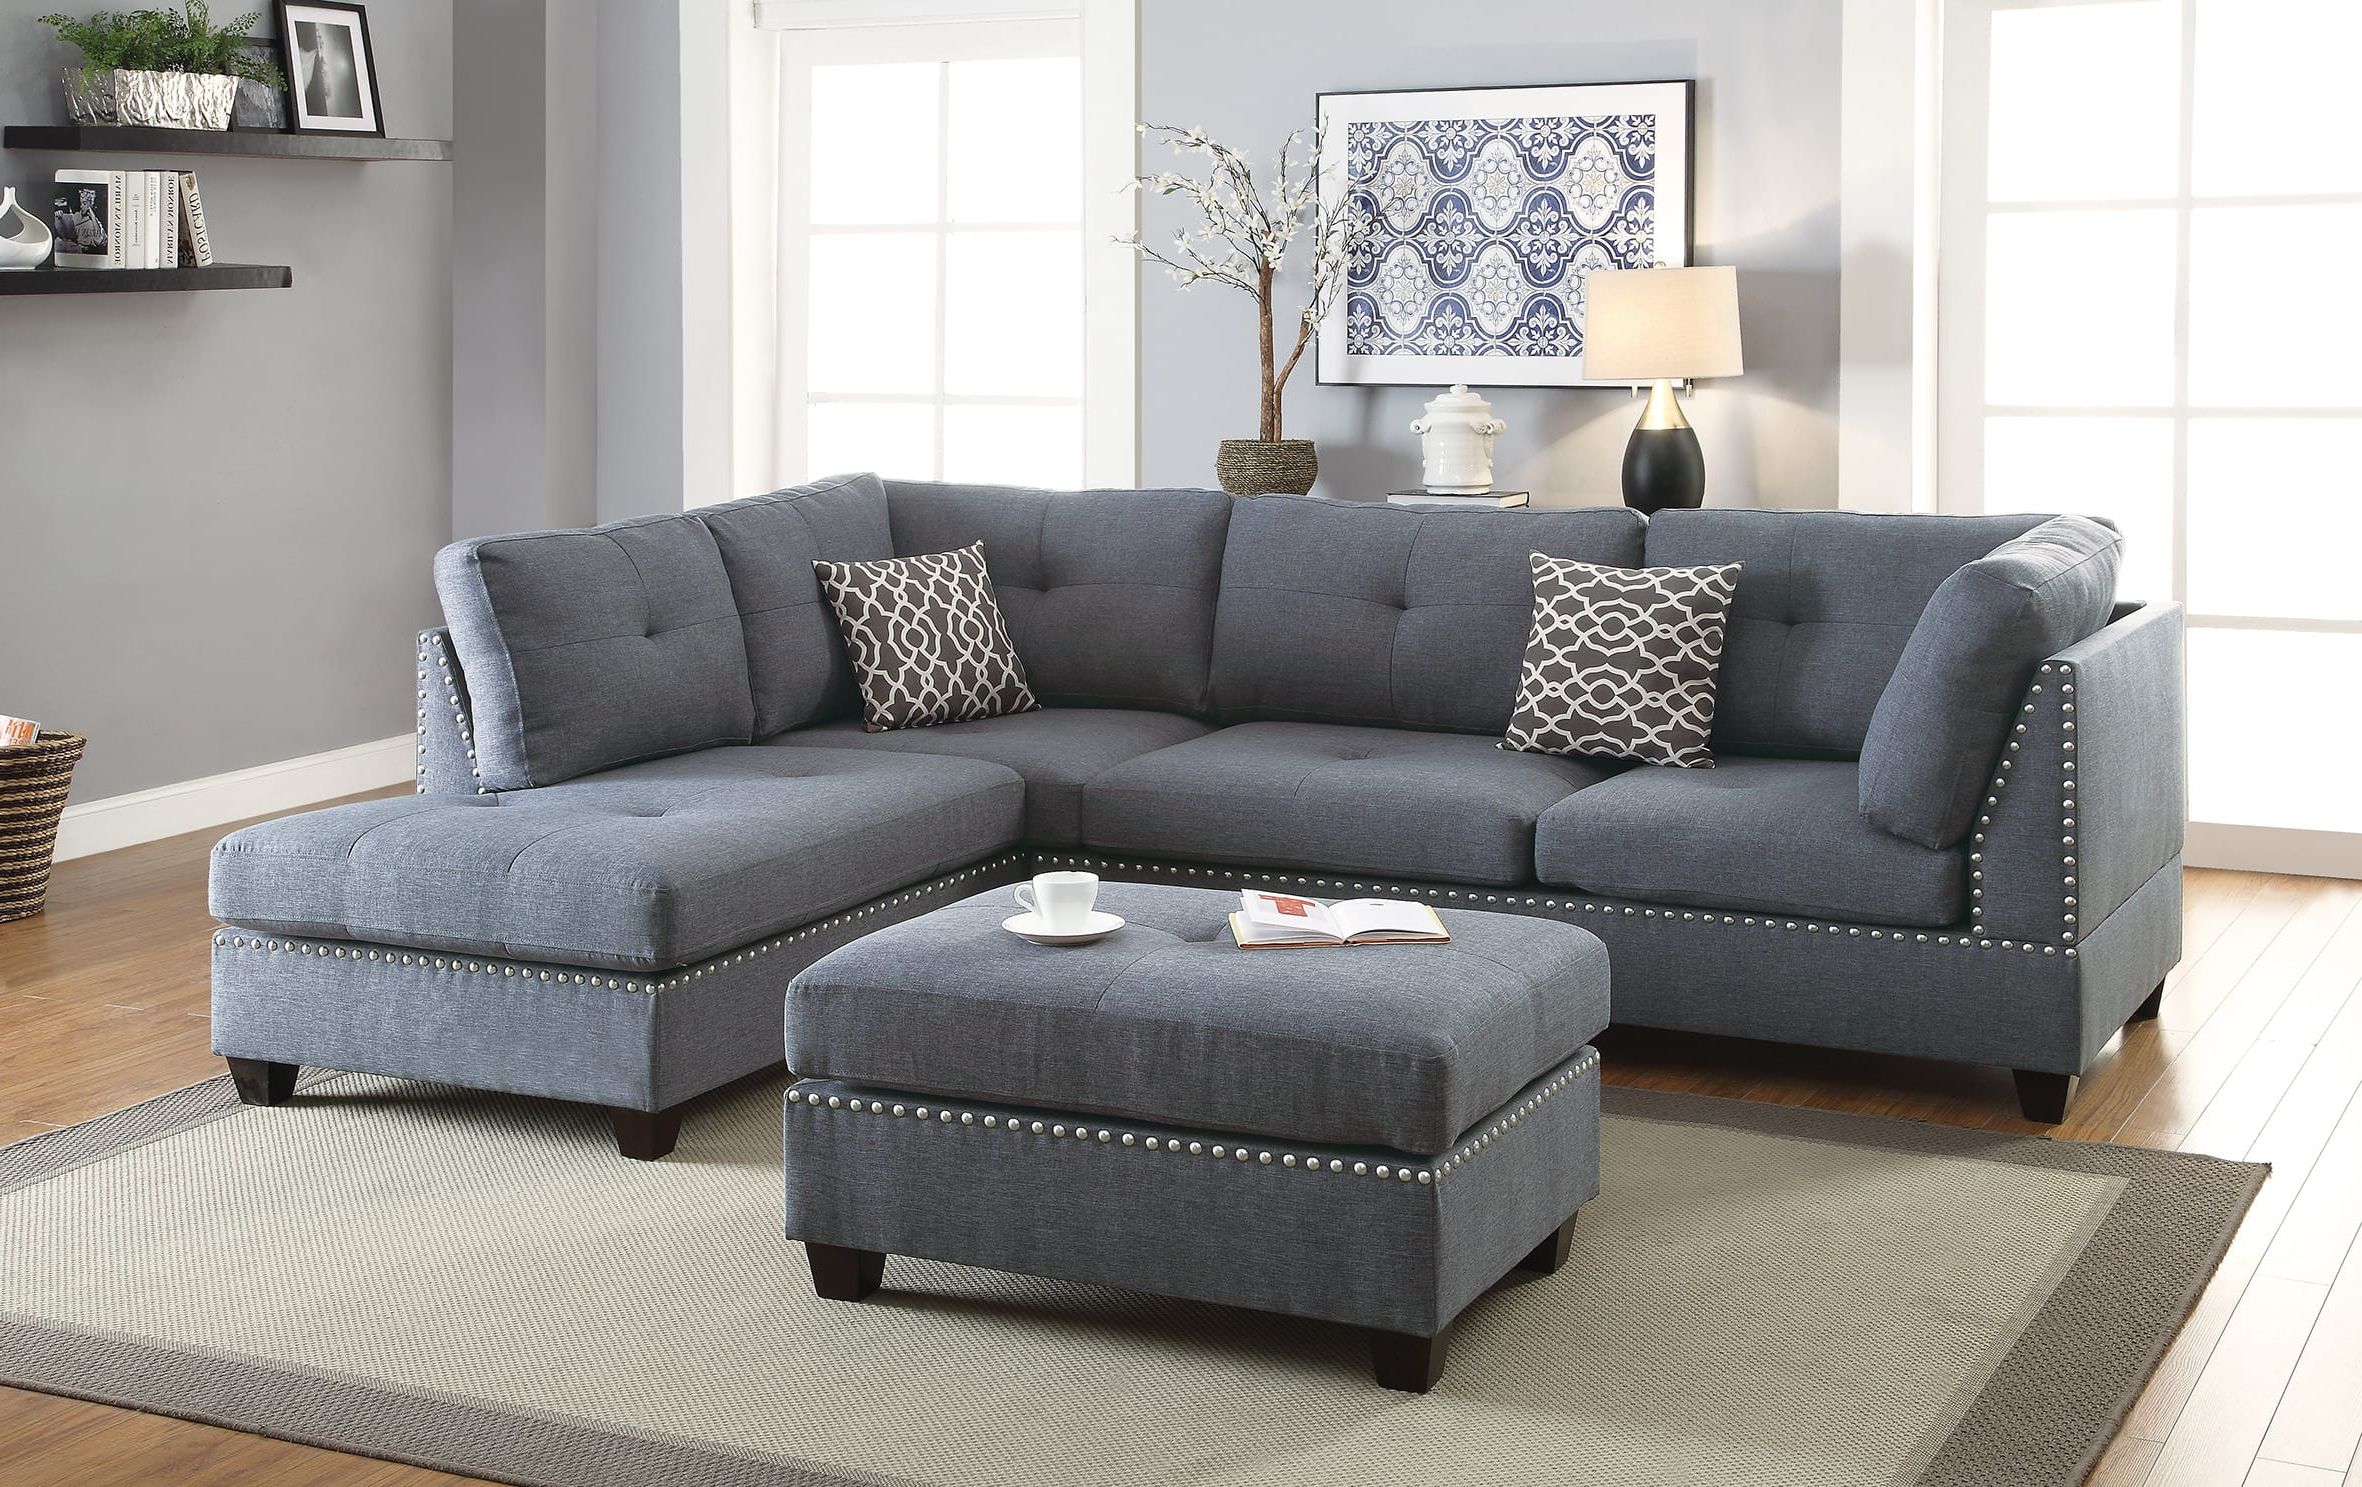 Most Recent F6975 Blue Gray 3 Pcs Sectional Sofa Setpoundex Intended For Sofas In Bluish Grey (View 3 of 15)